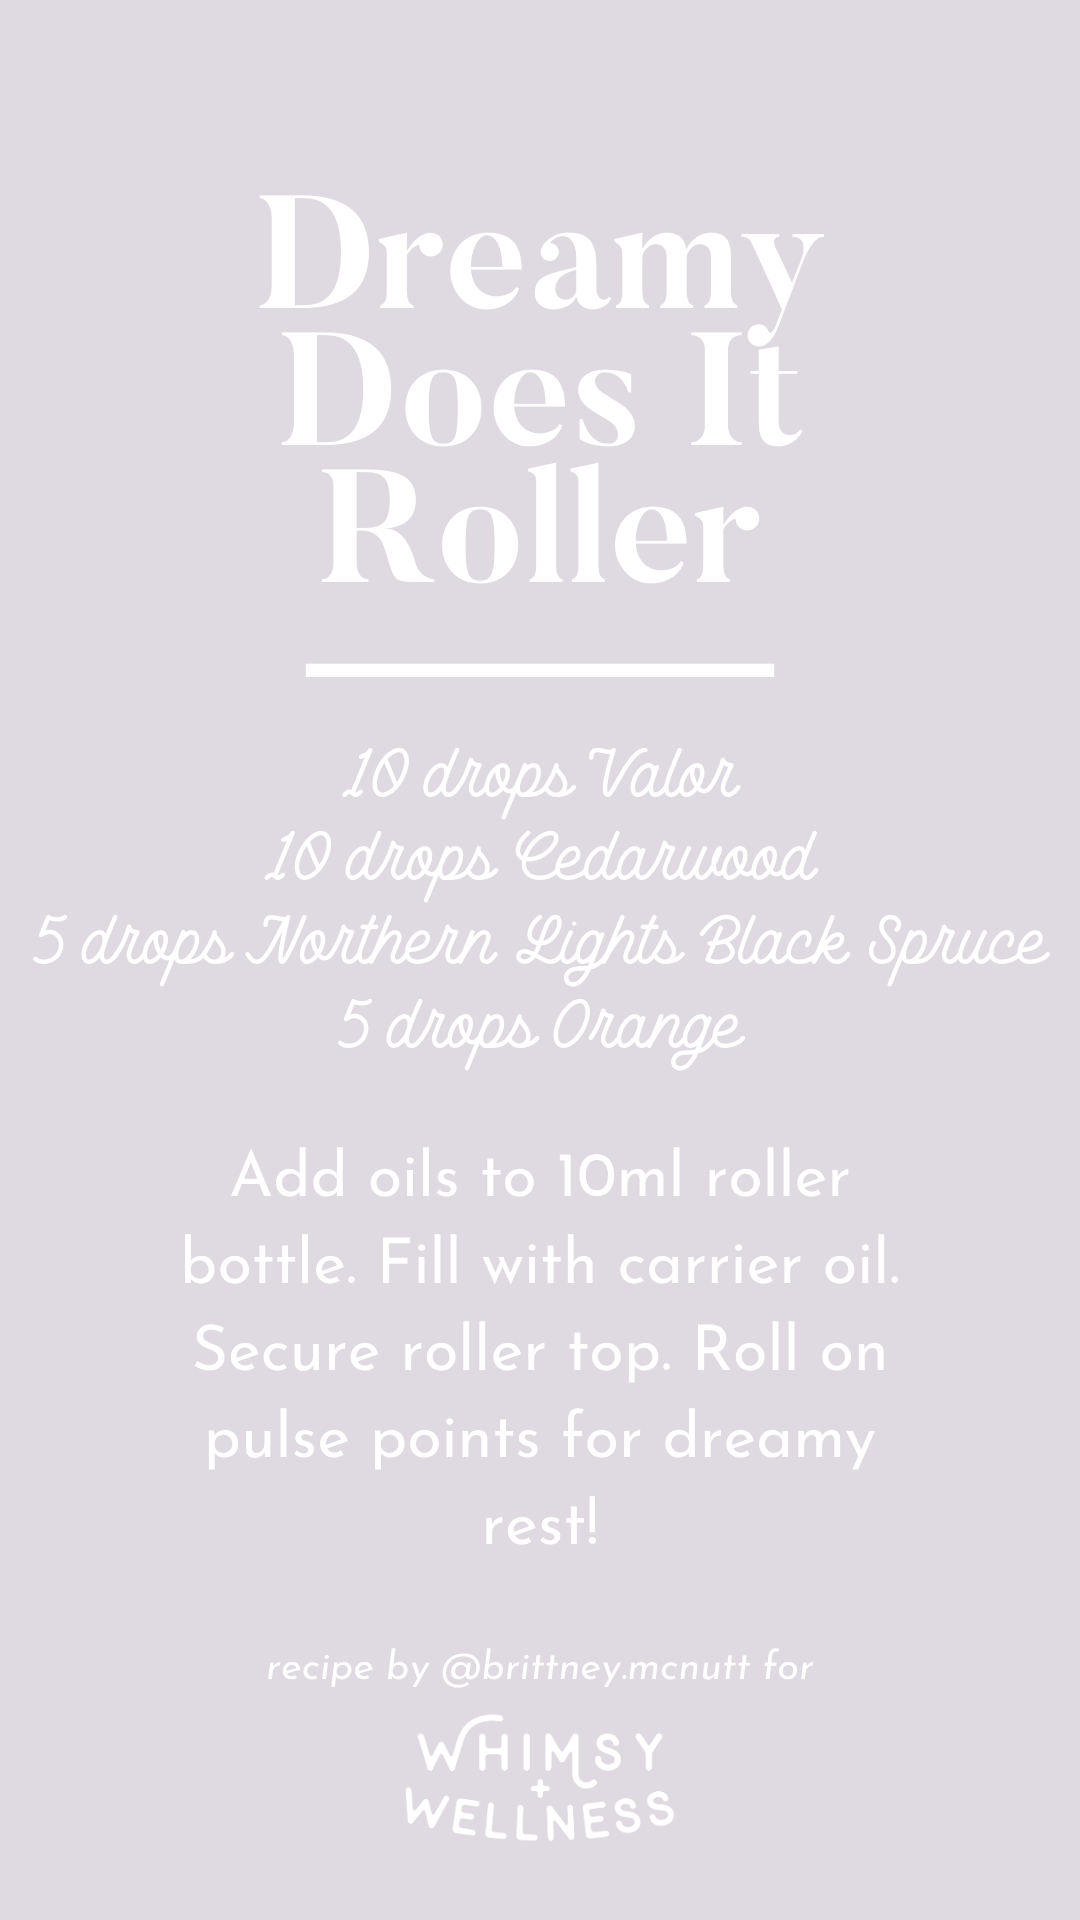 Dreamy does it roller recipe blend using Young Living essential oils